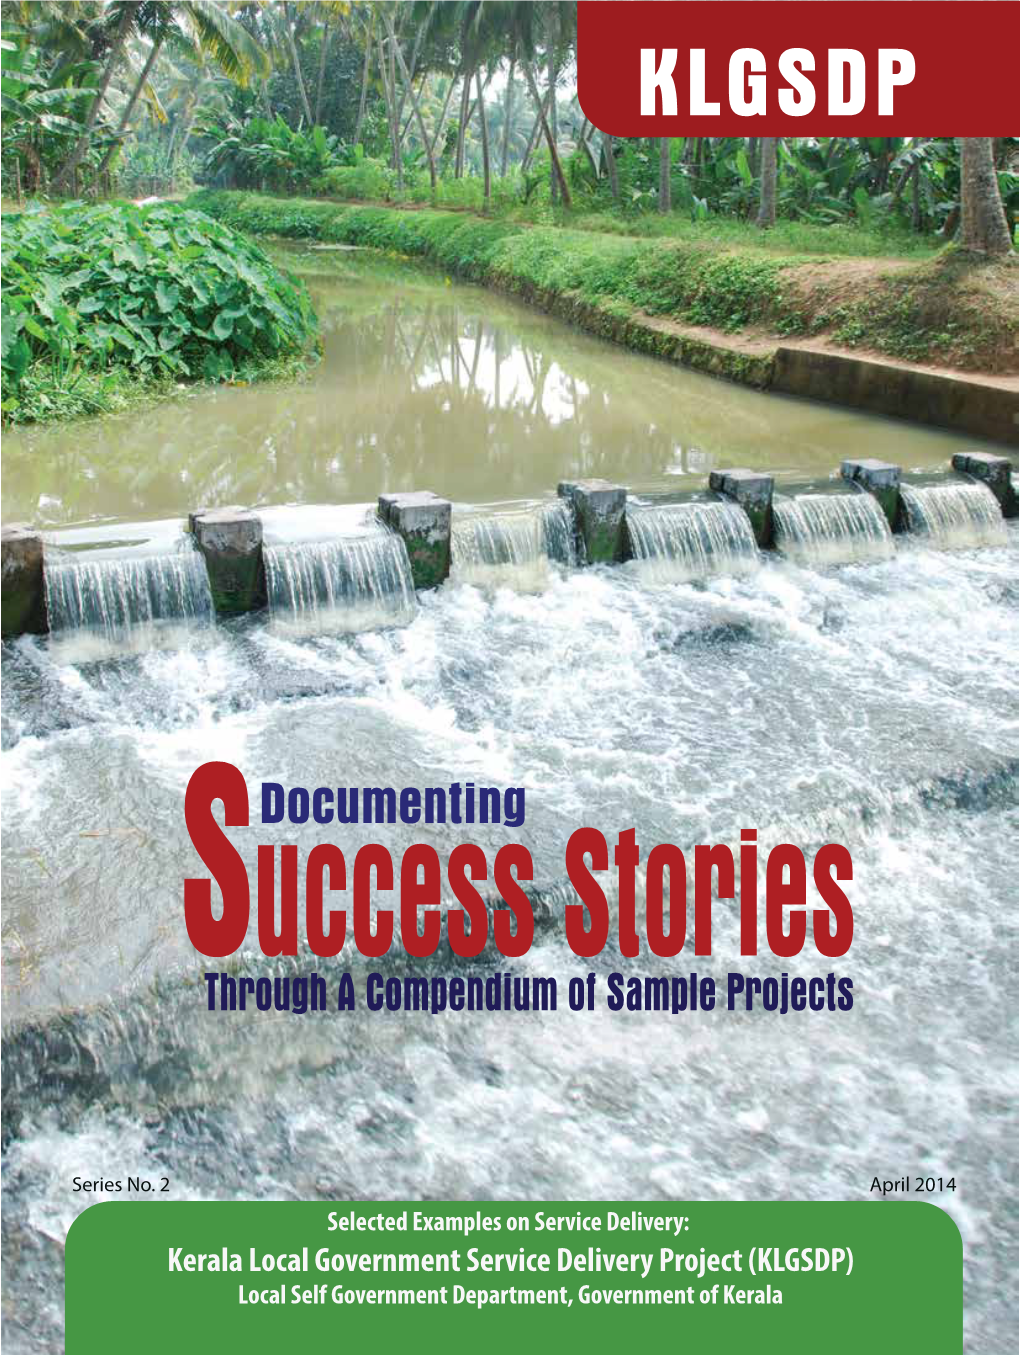 Success Stories Through a Compendium of Sample Projects